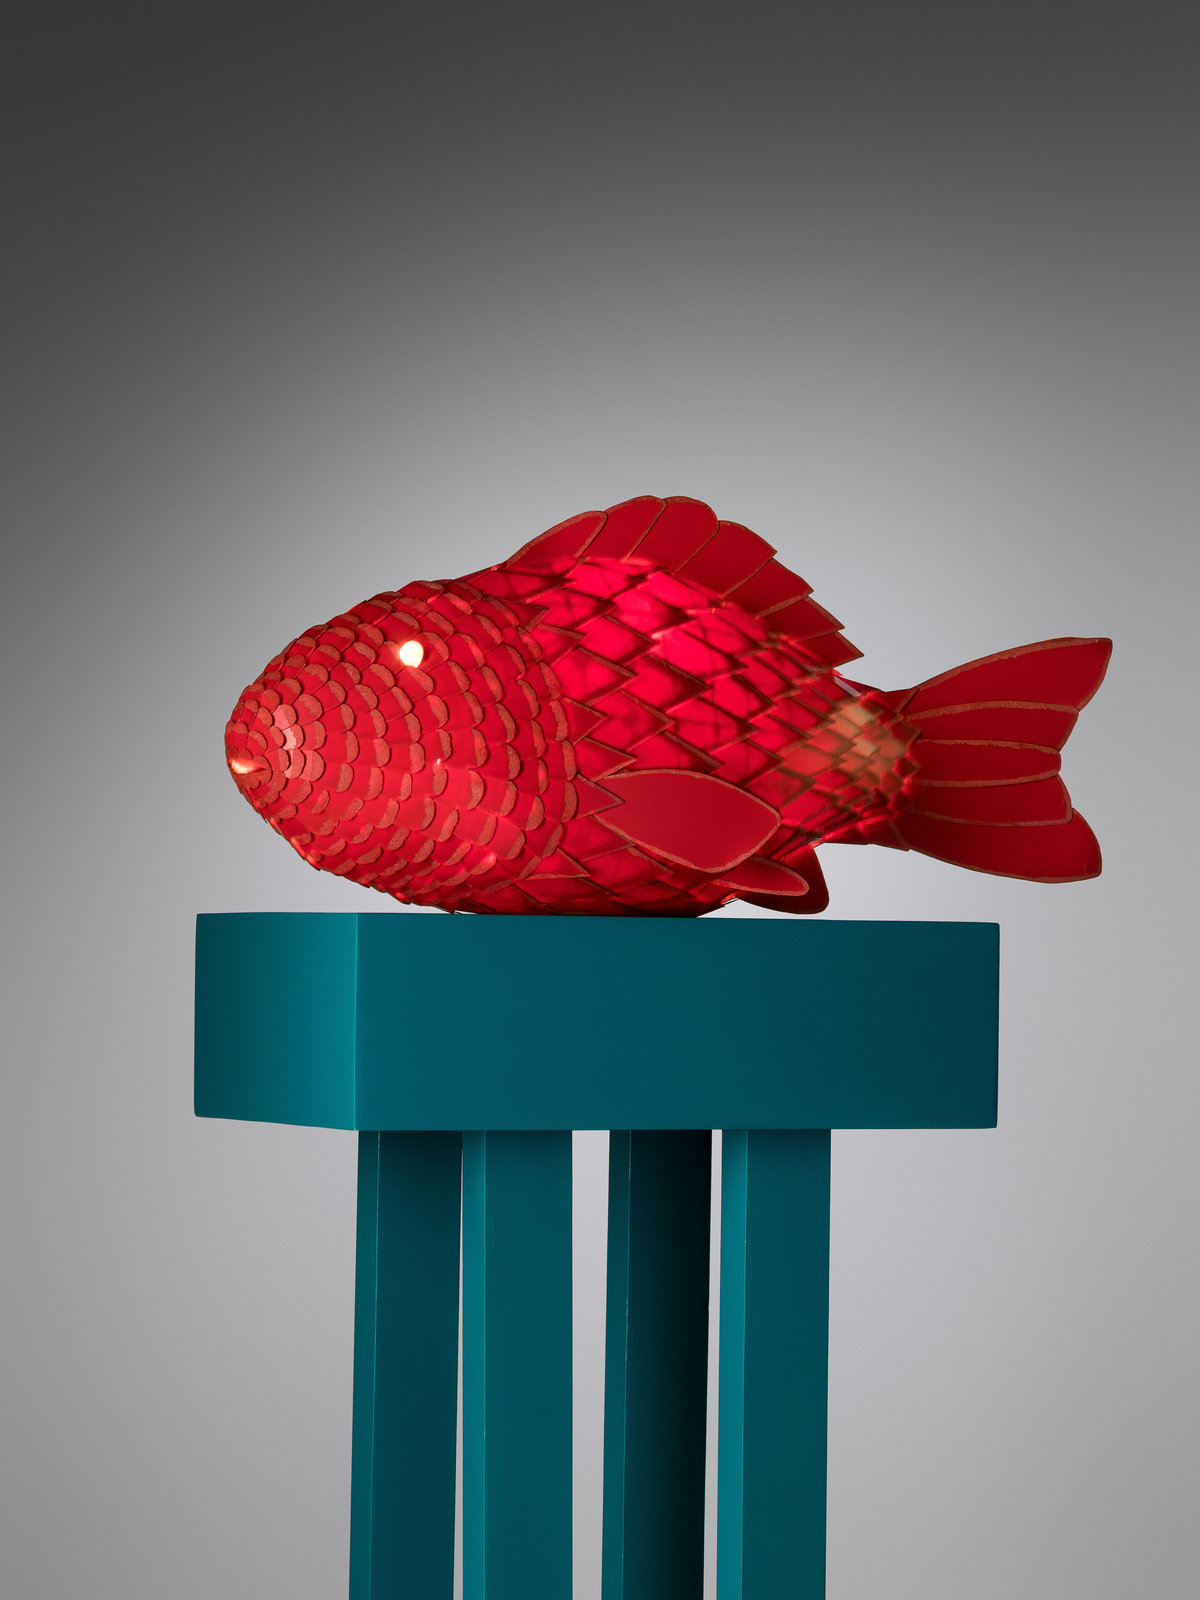 Fish Lamp, c. 1985 Produced by New City Editions, Venice, CA